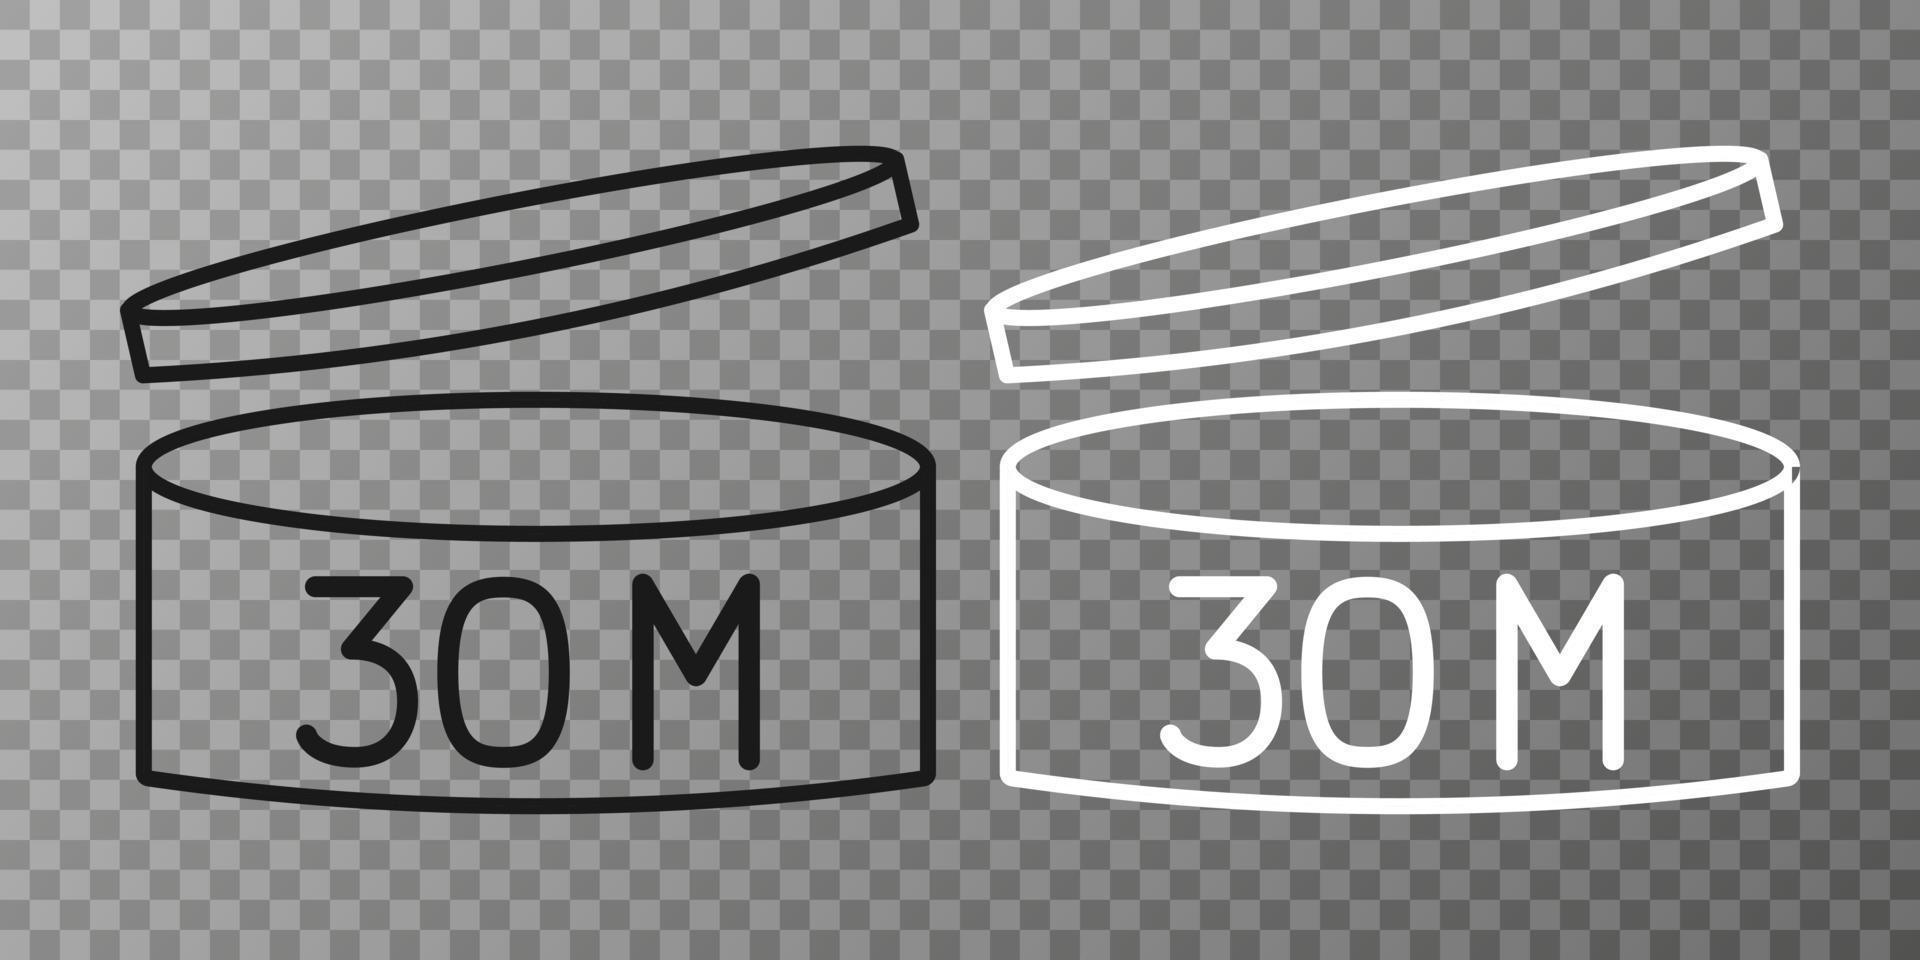 Expiration date 30 month icon. Period after opening symbol. Vector Illustration.